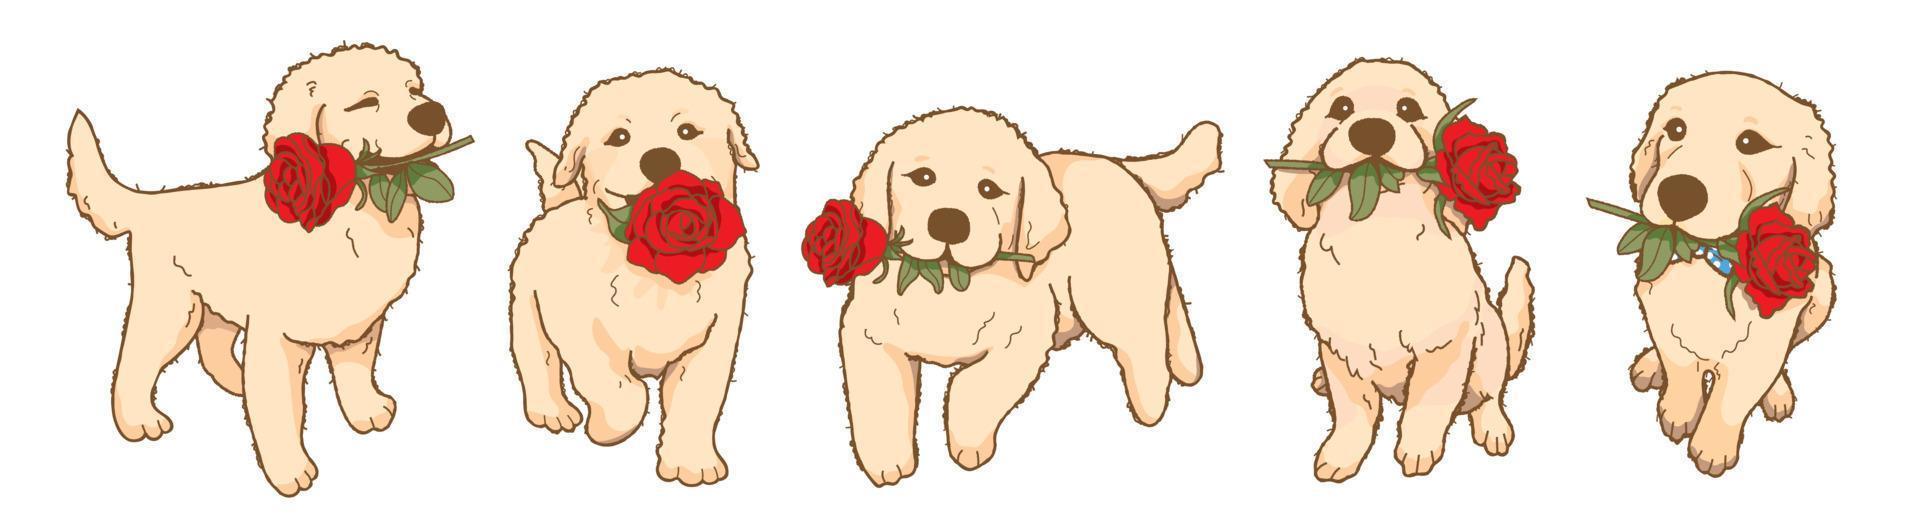 Cartoon Playful golden retriever puppy holding red rose flower in mouth, Lovely dog in love vector